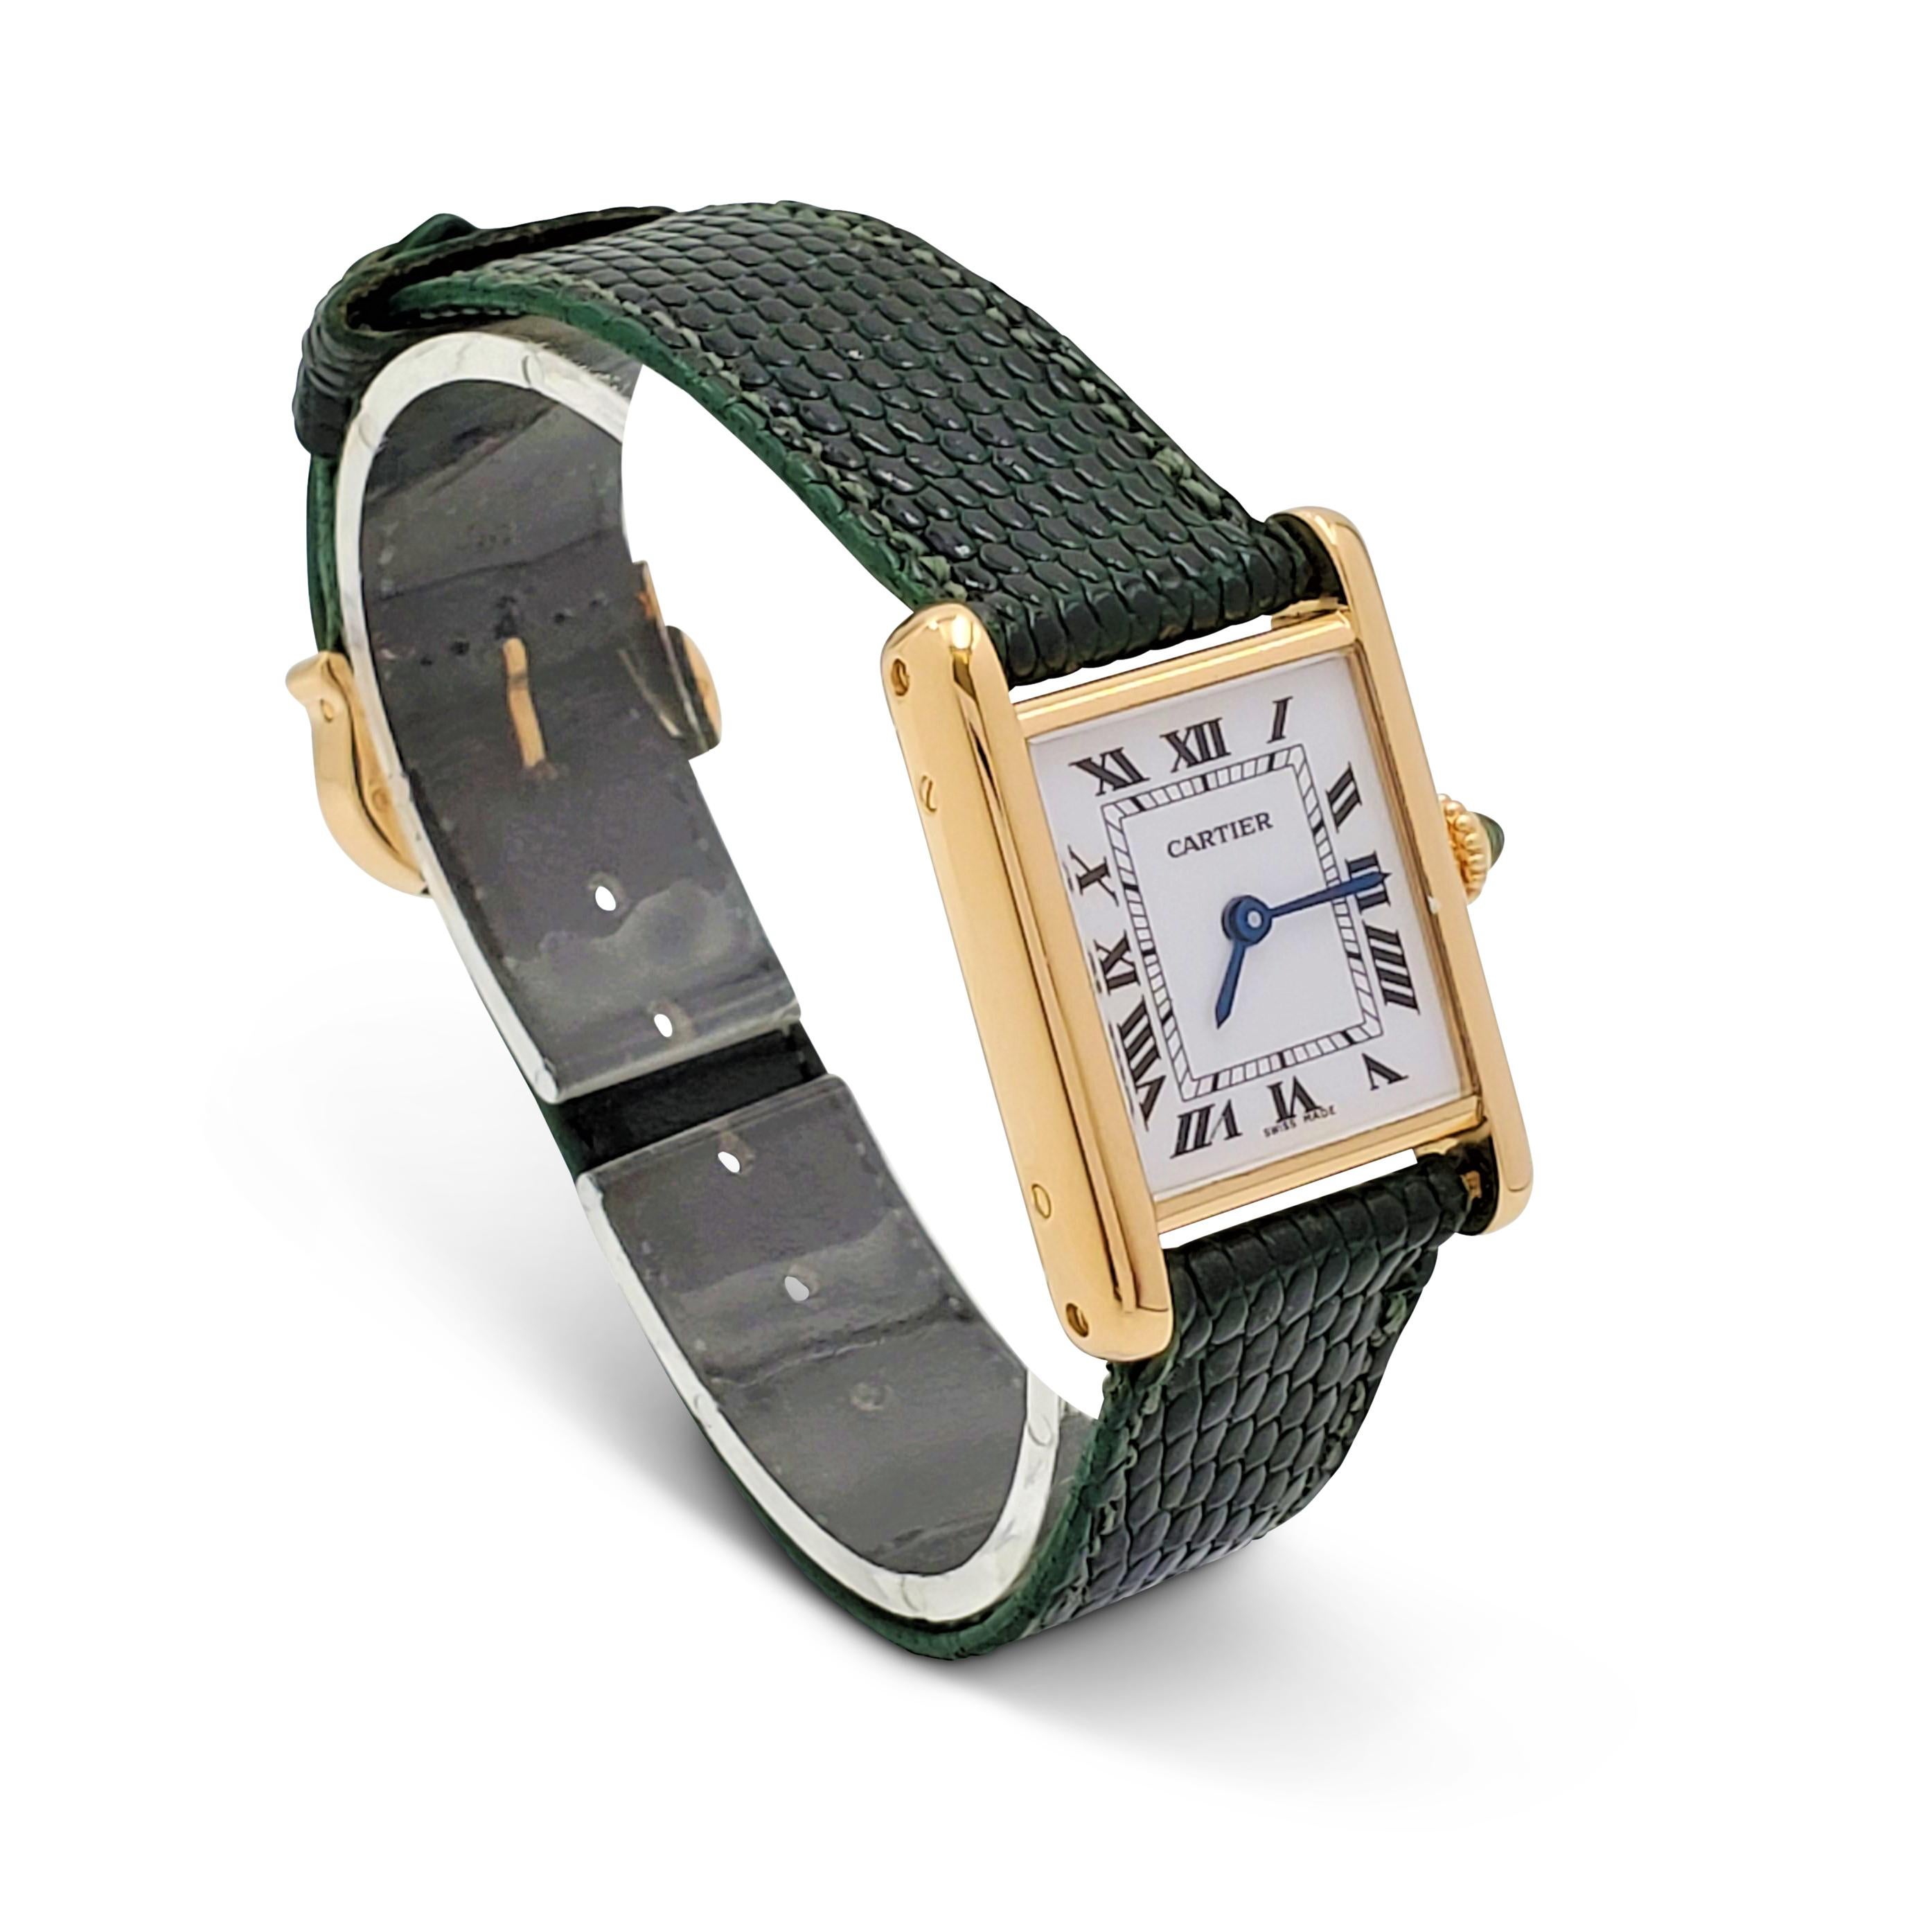 Authentic Cartier 'Tank Louis' watch crafted in 18 karat yellow gold features a classic rectangular case measuring 28 x 20 mm. The cream-colored dial is completed with black Roman numerals and blued-steel sword-shaped hands. Secret Cartier signature